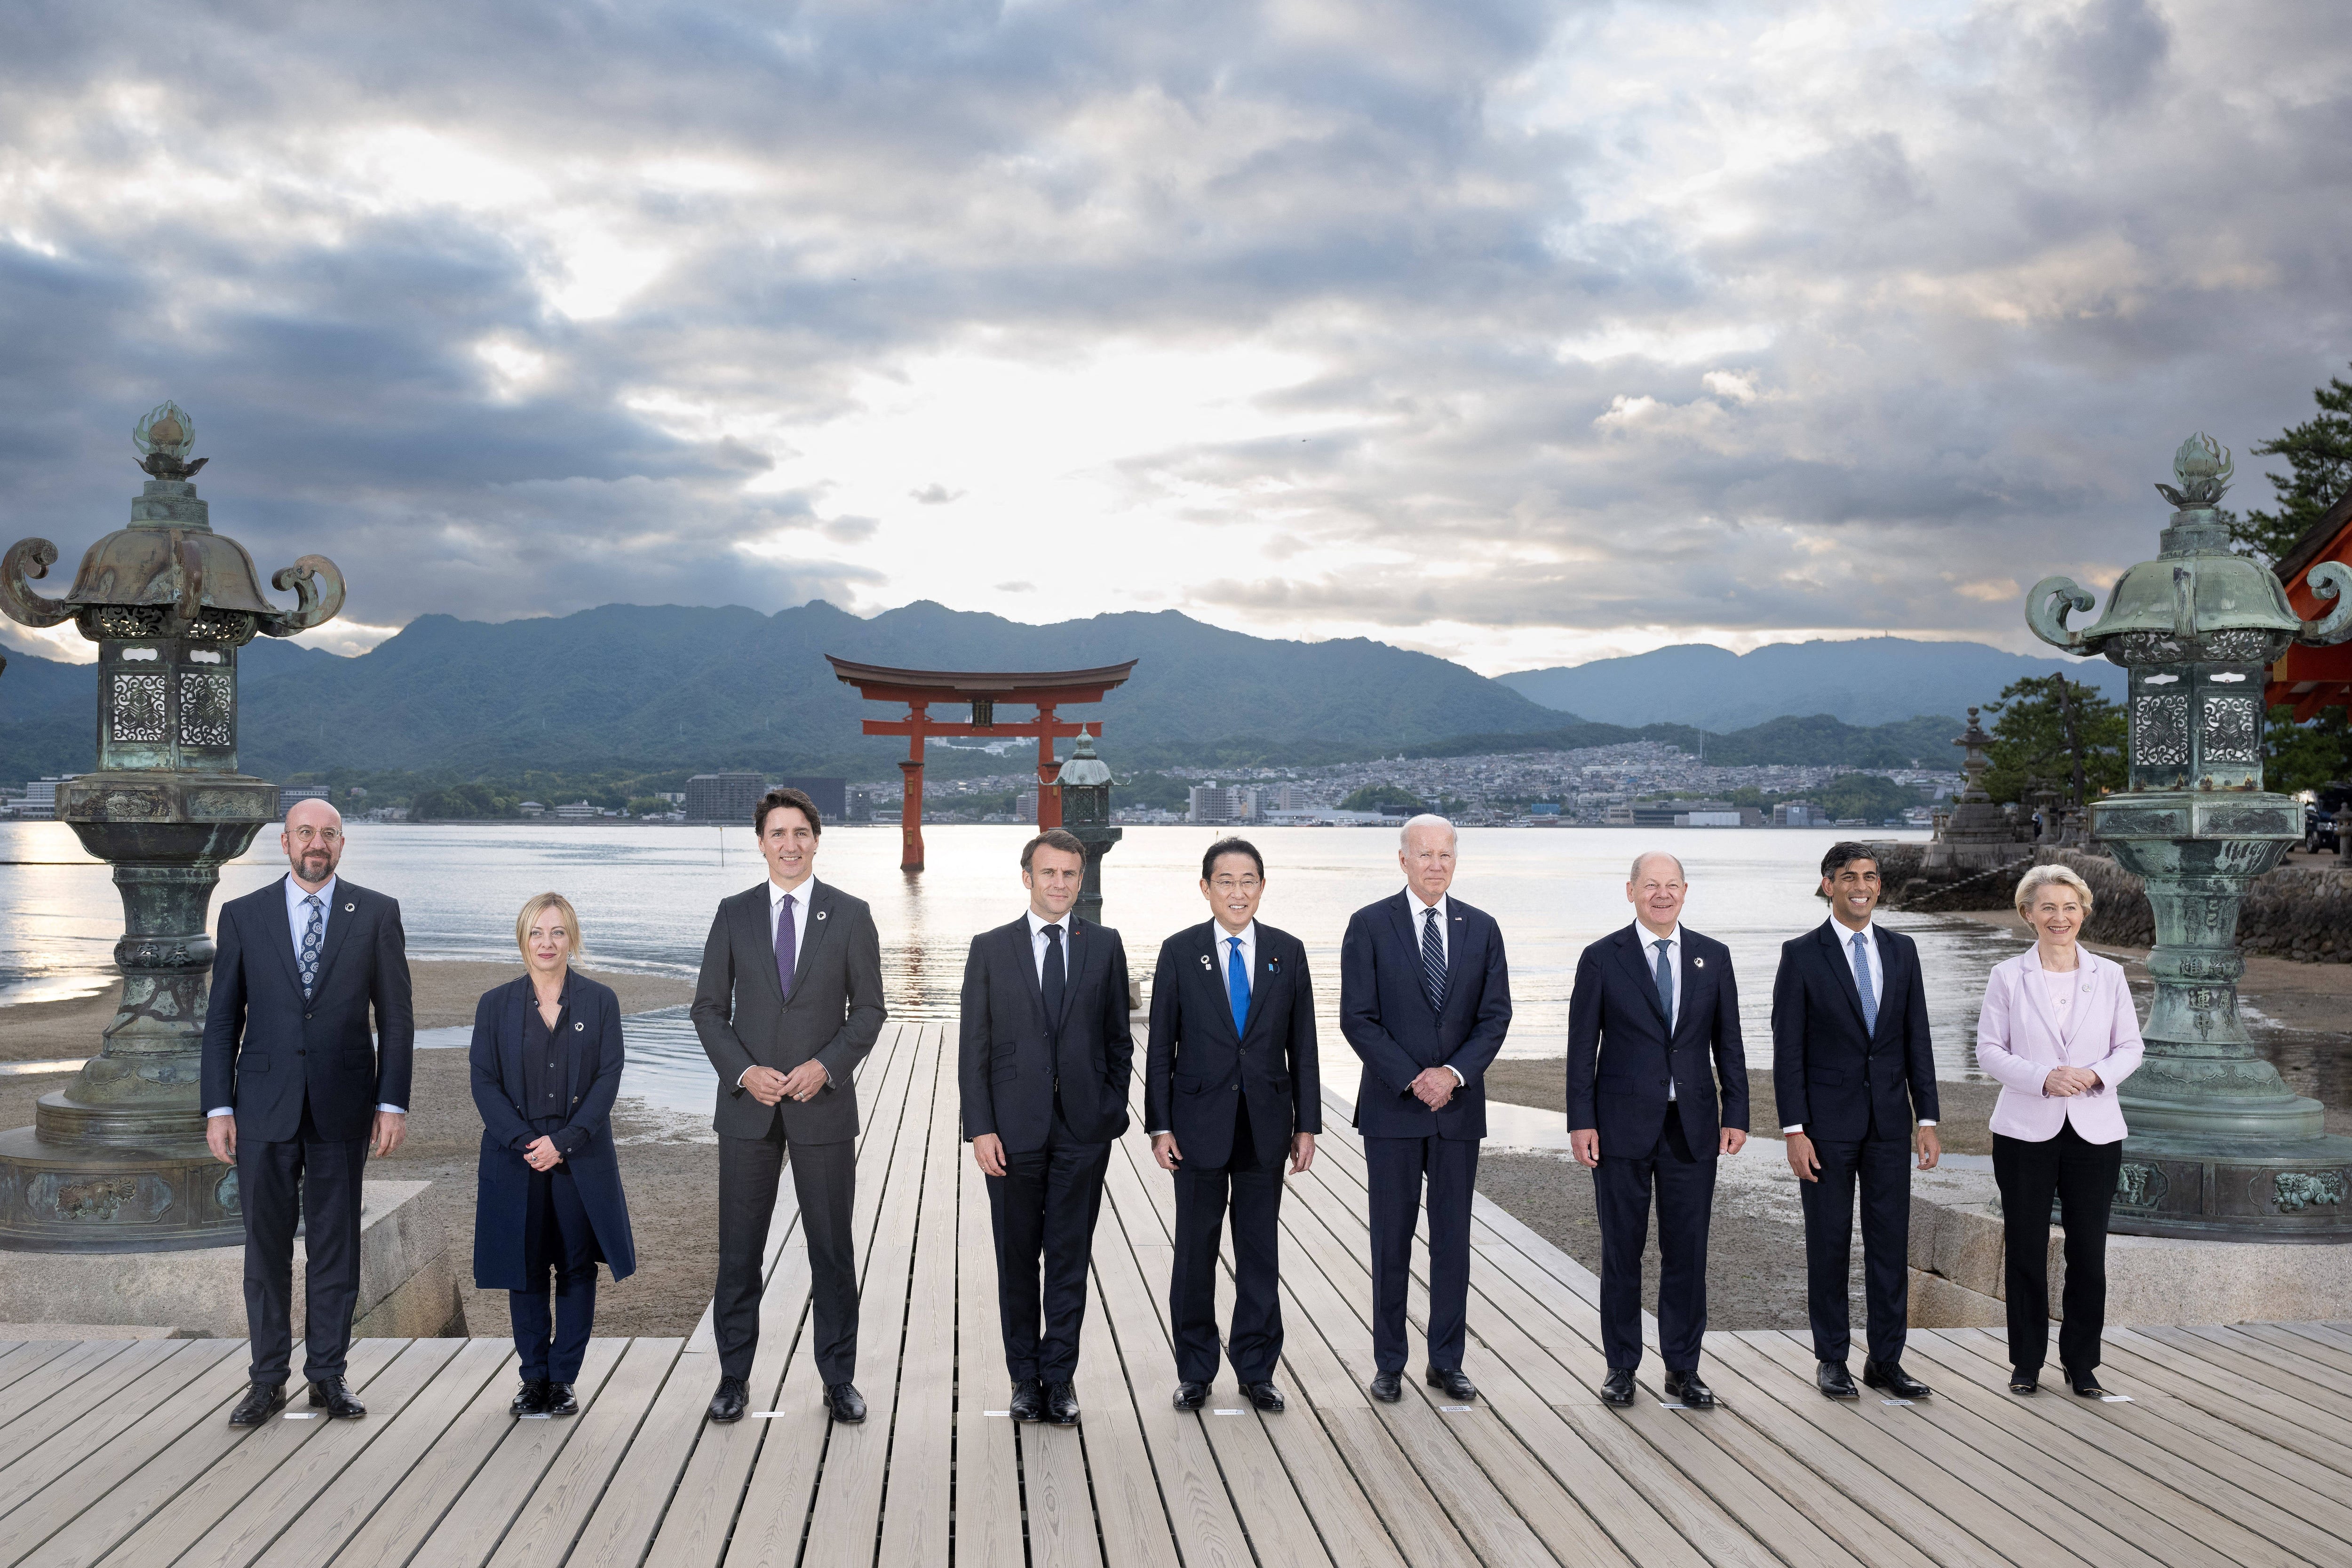 G7 pledges to take “necessary steps” for financial stability